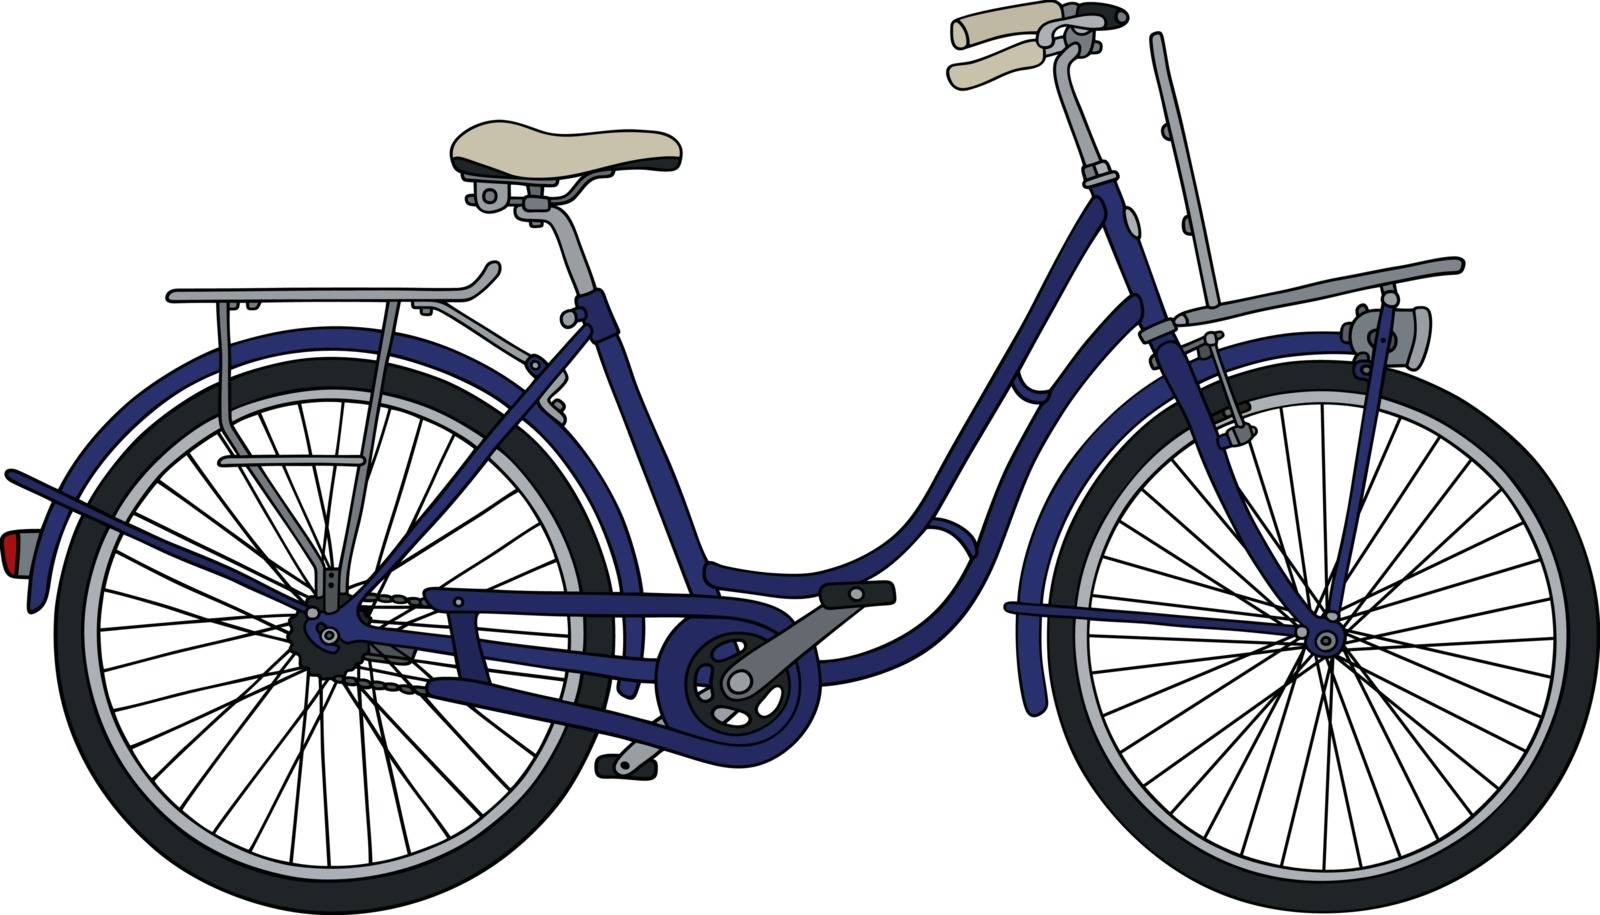 Classic blue bicycle by vostal